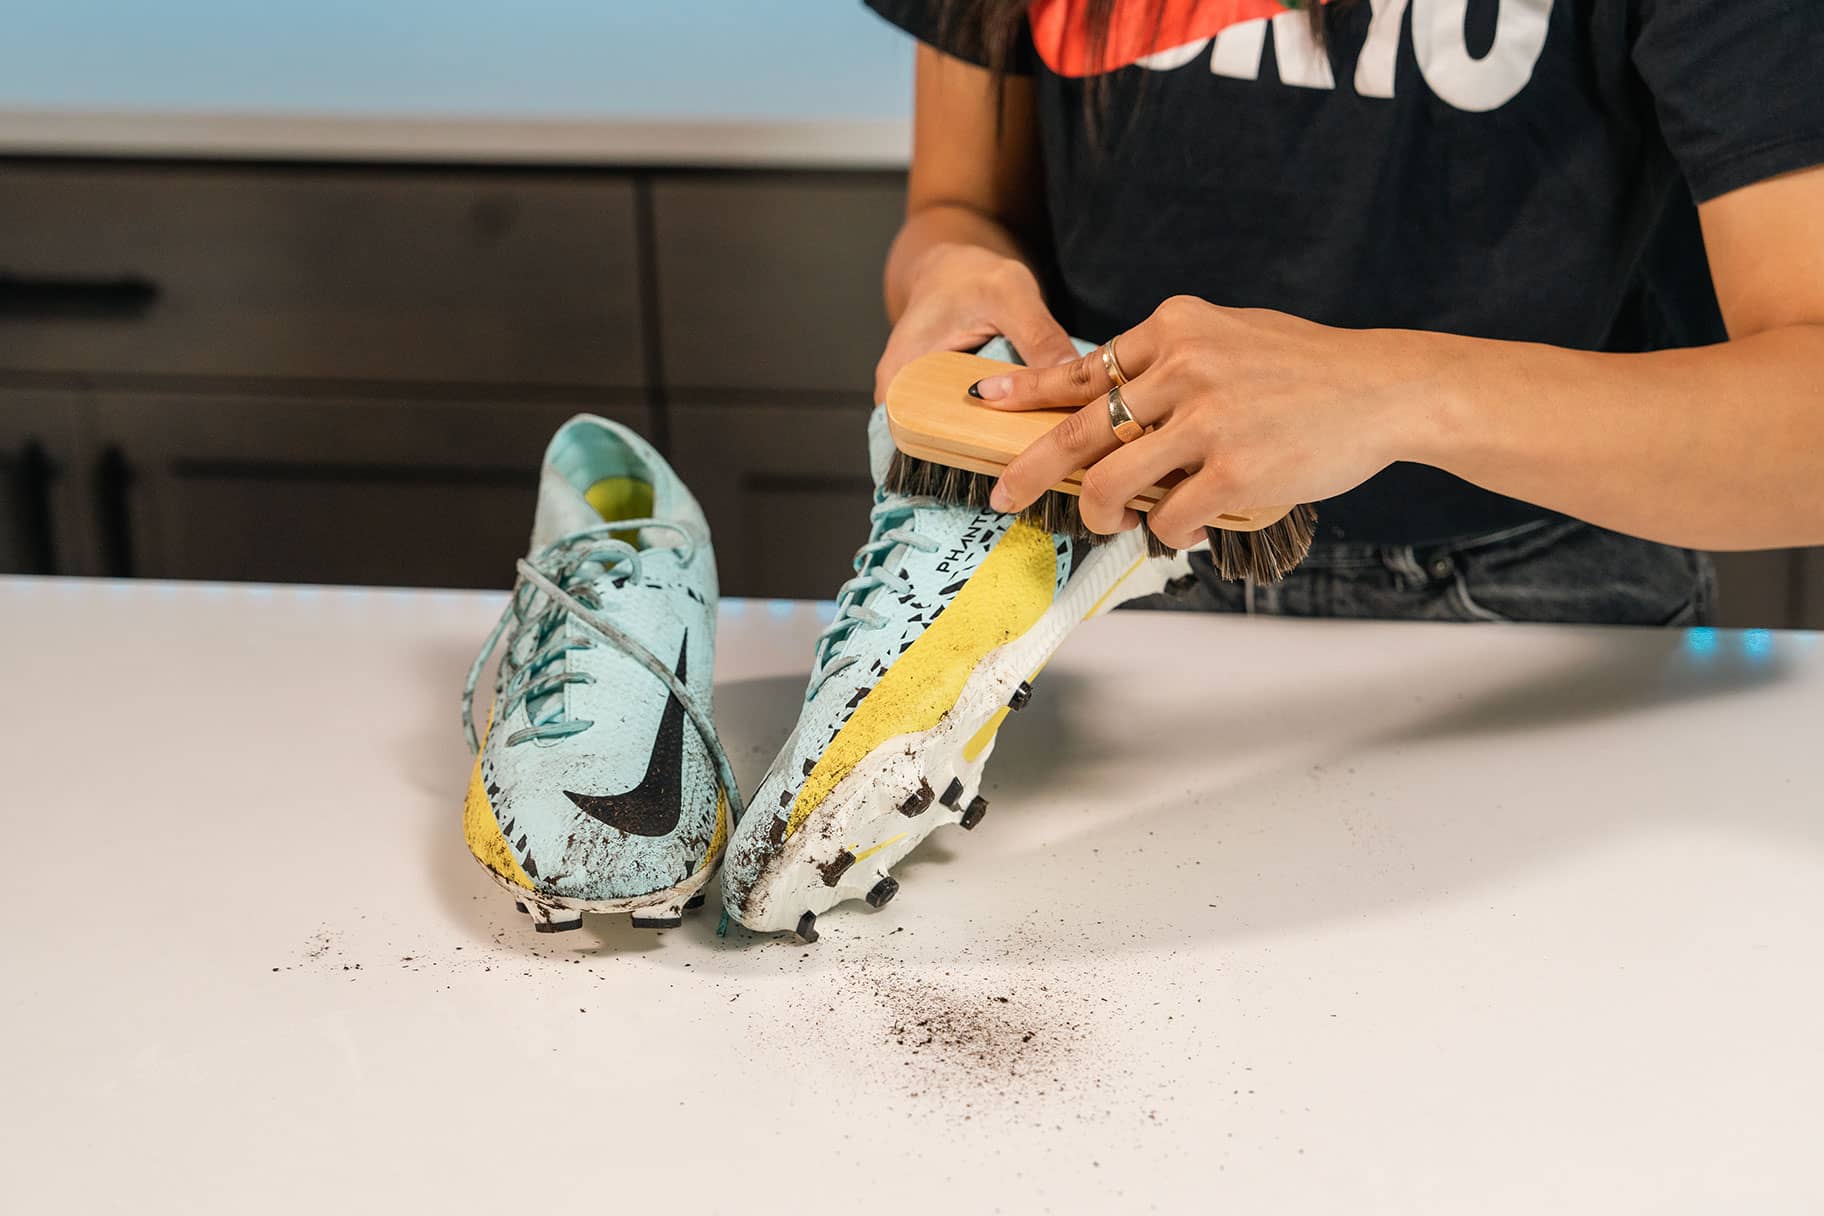 How to Clean Football Boots